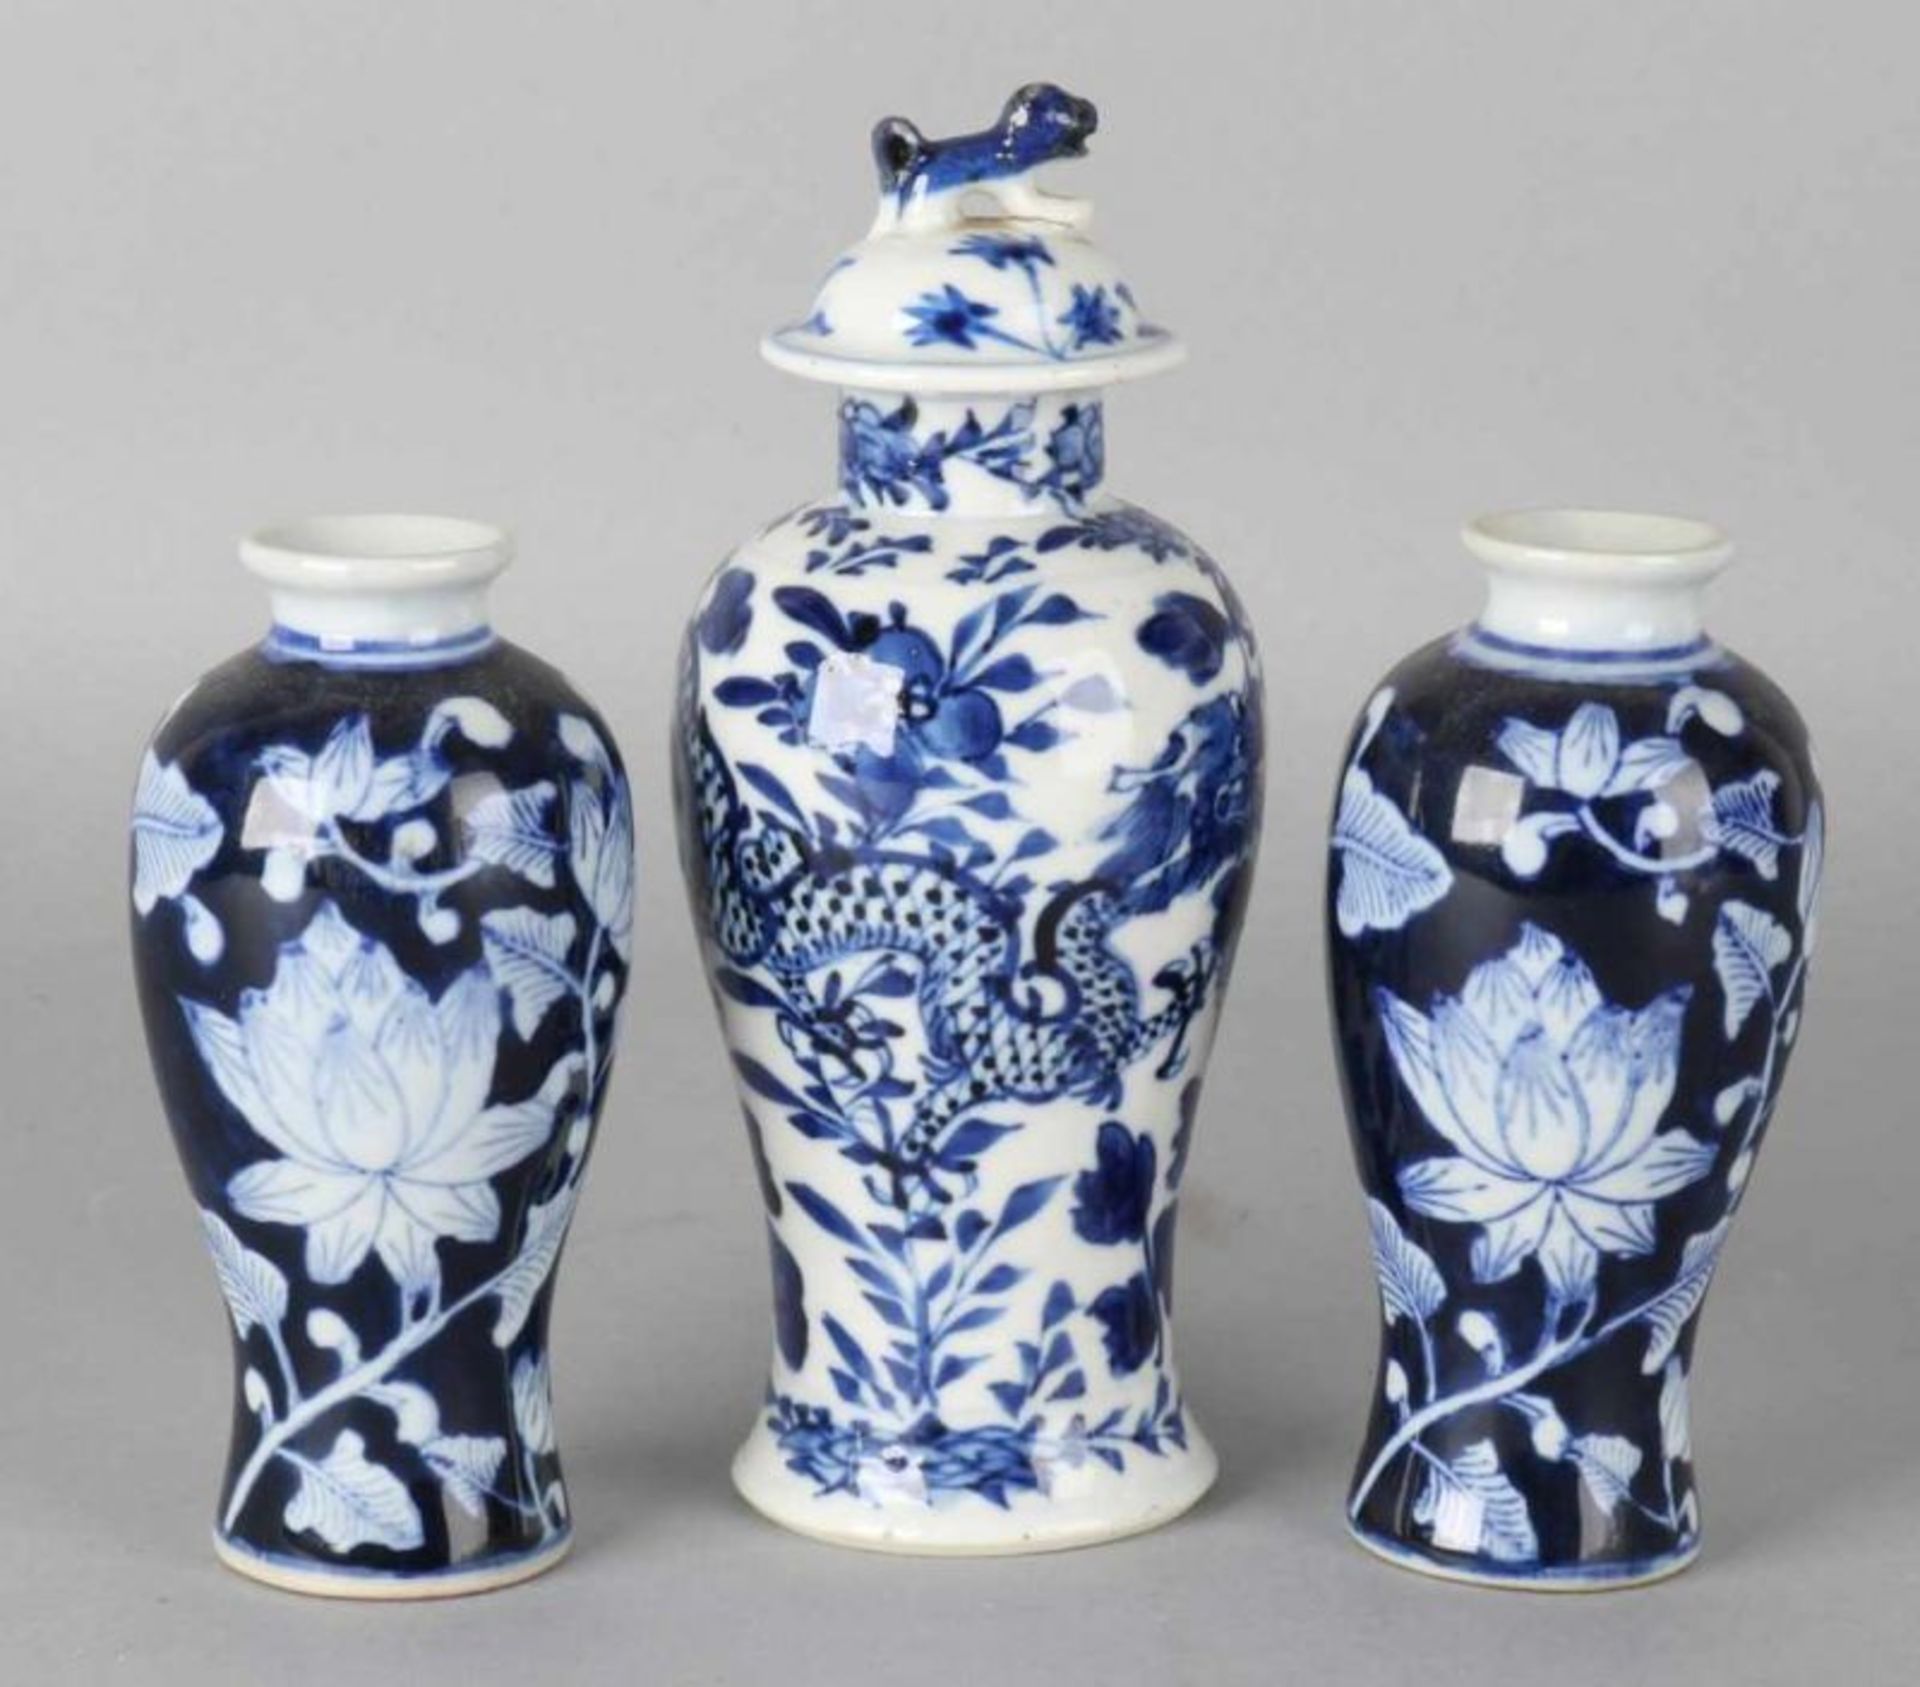 Three old Chinese porcelain vases. About 1900 and later. One lid with dragon decor. Marked. About: